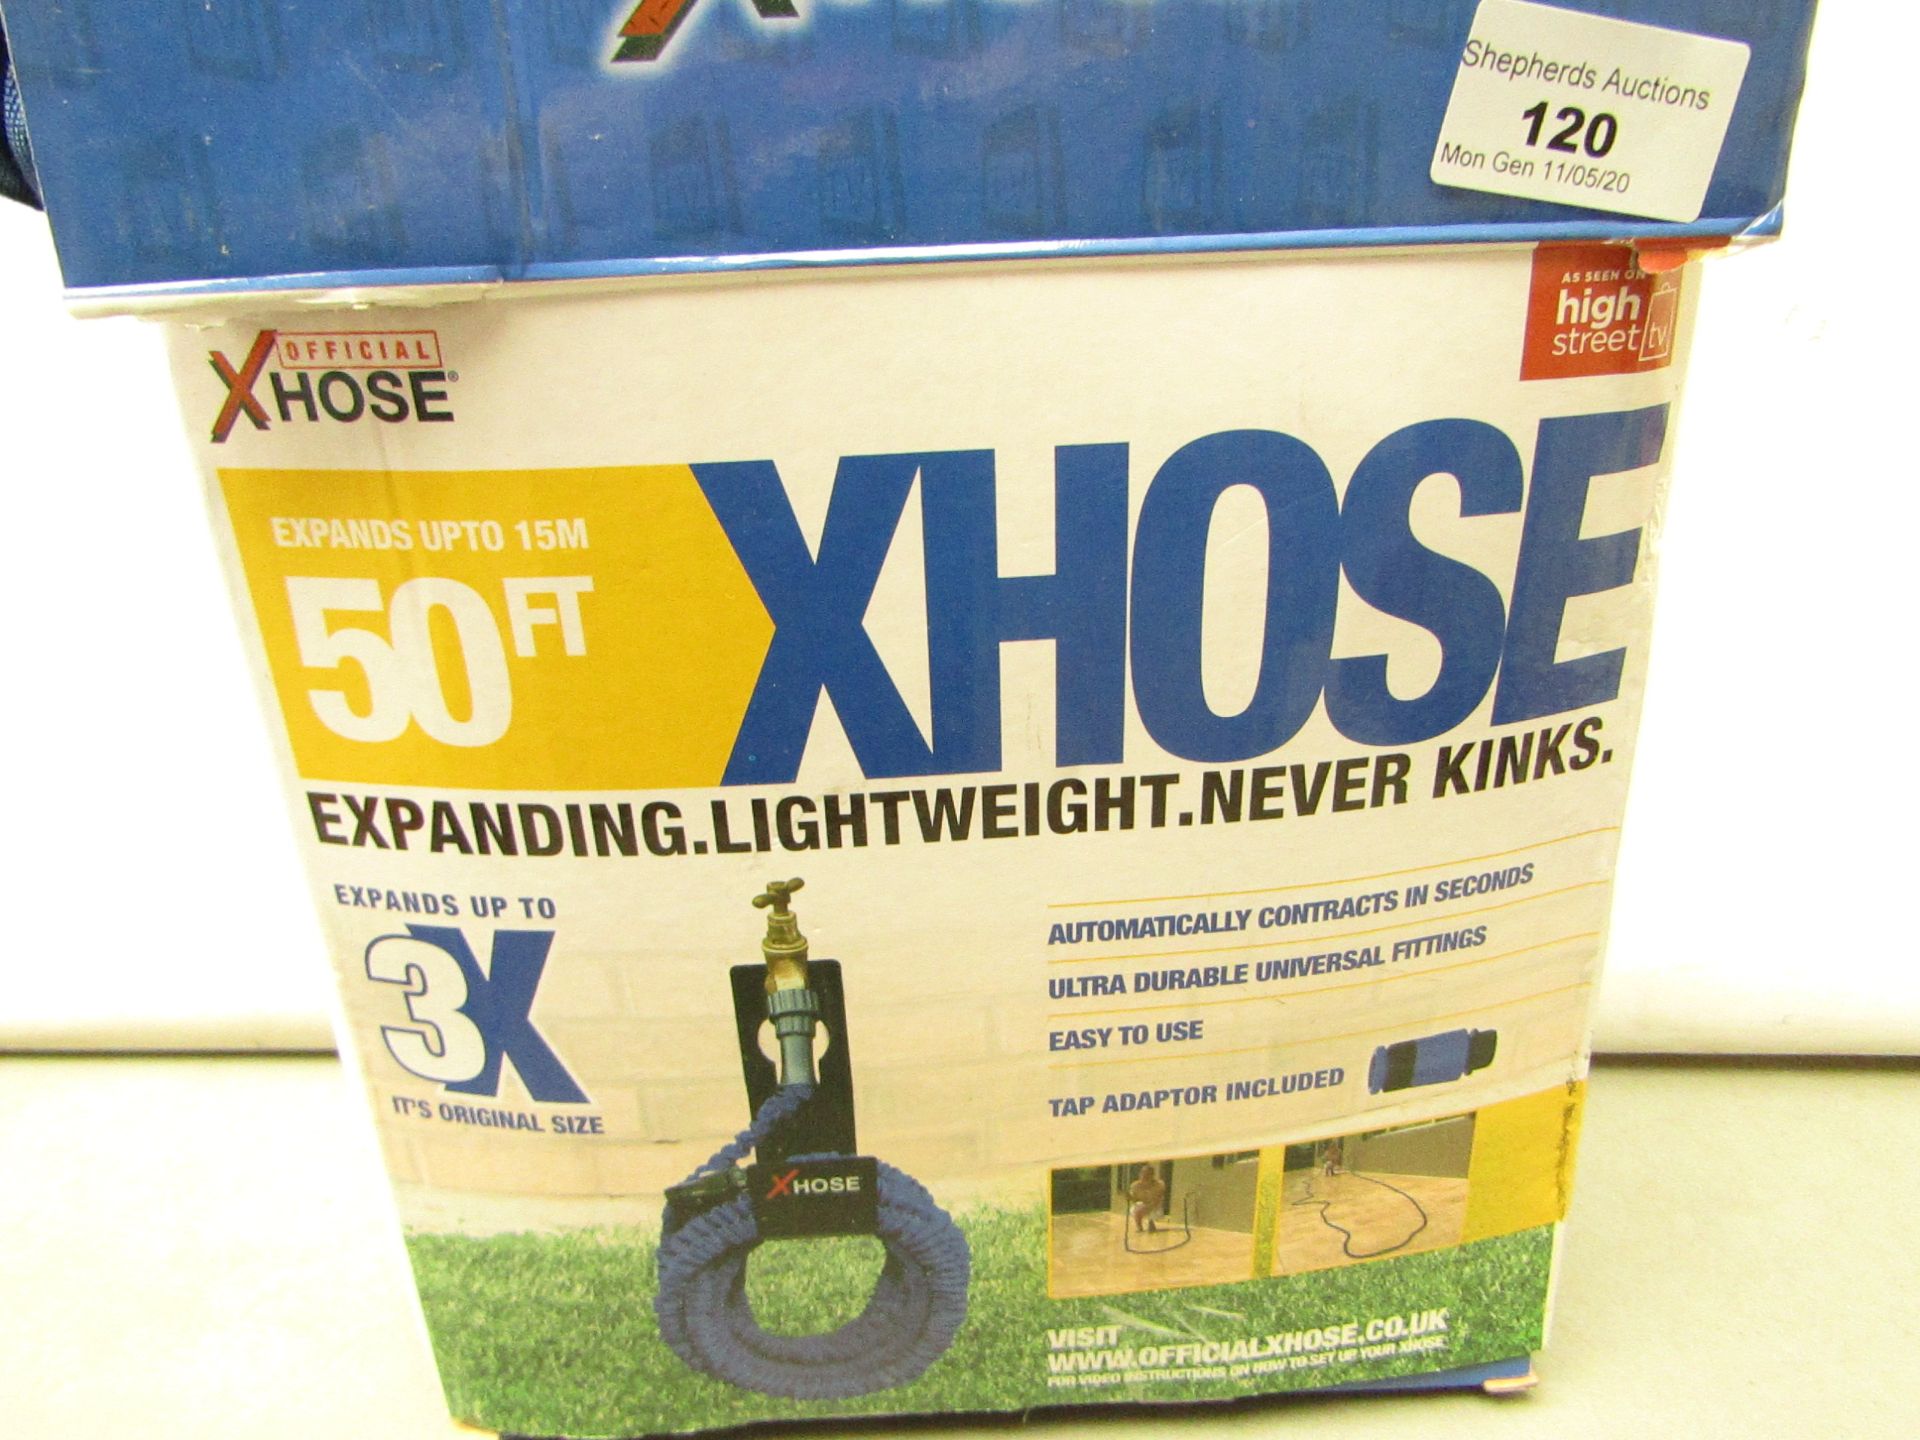 | 1x | XHOSE 50FT | UNCHECKED AND BOXED | NO ONLINE RE-SALE | SKU C5060191461078 | RRP £29:99 |TOTAL